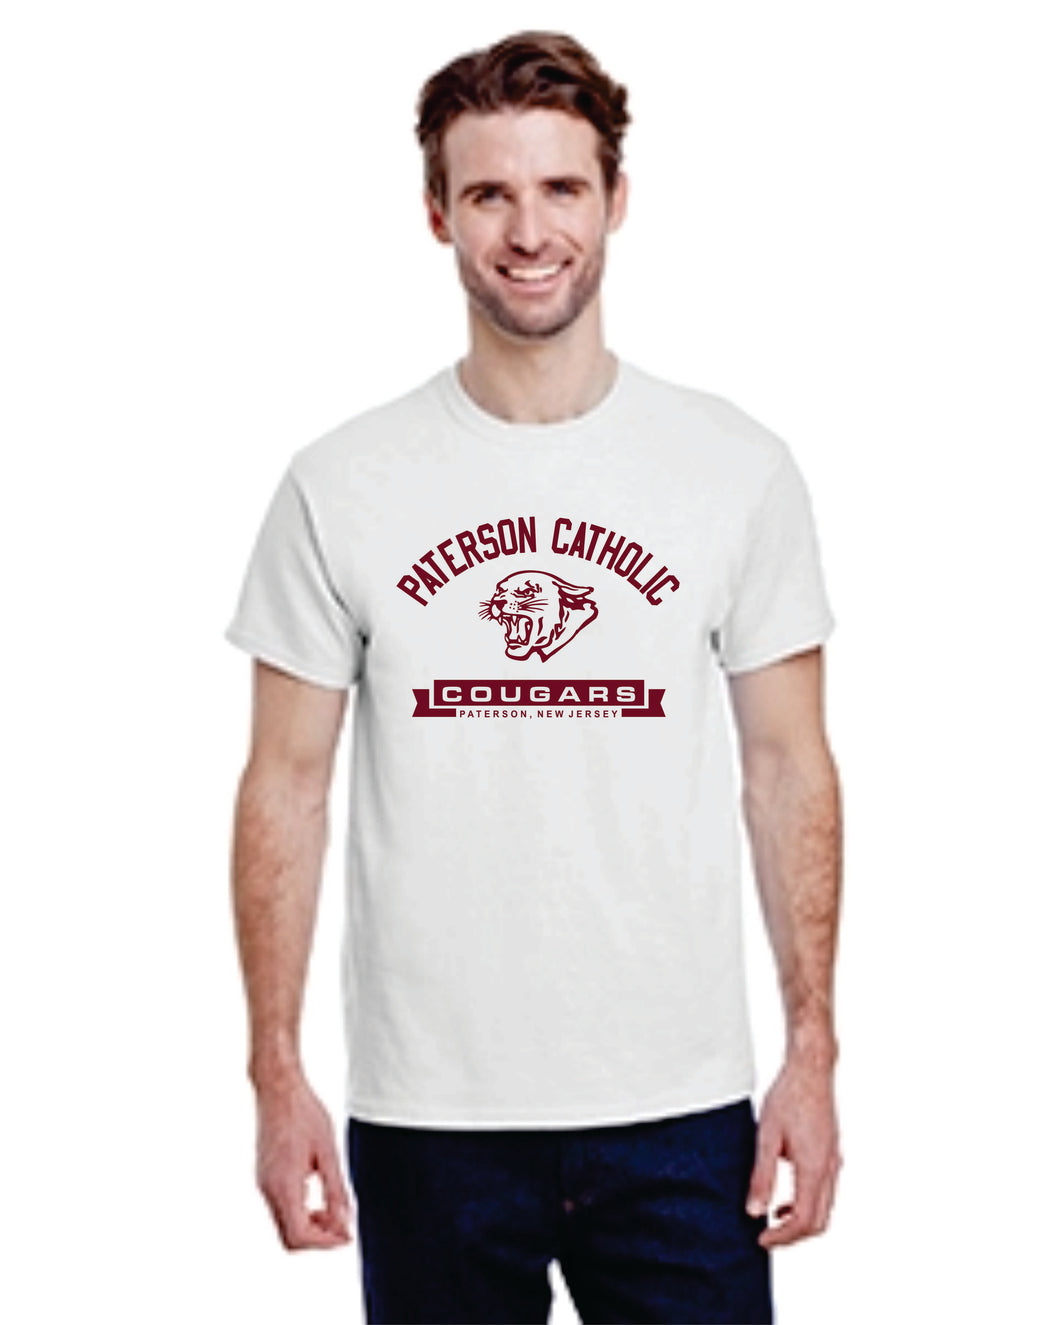 Paterson Catholic, Paterson, NJ COUGARS  SHIRT 002 FREE SHIPPING in USA